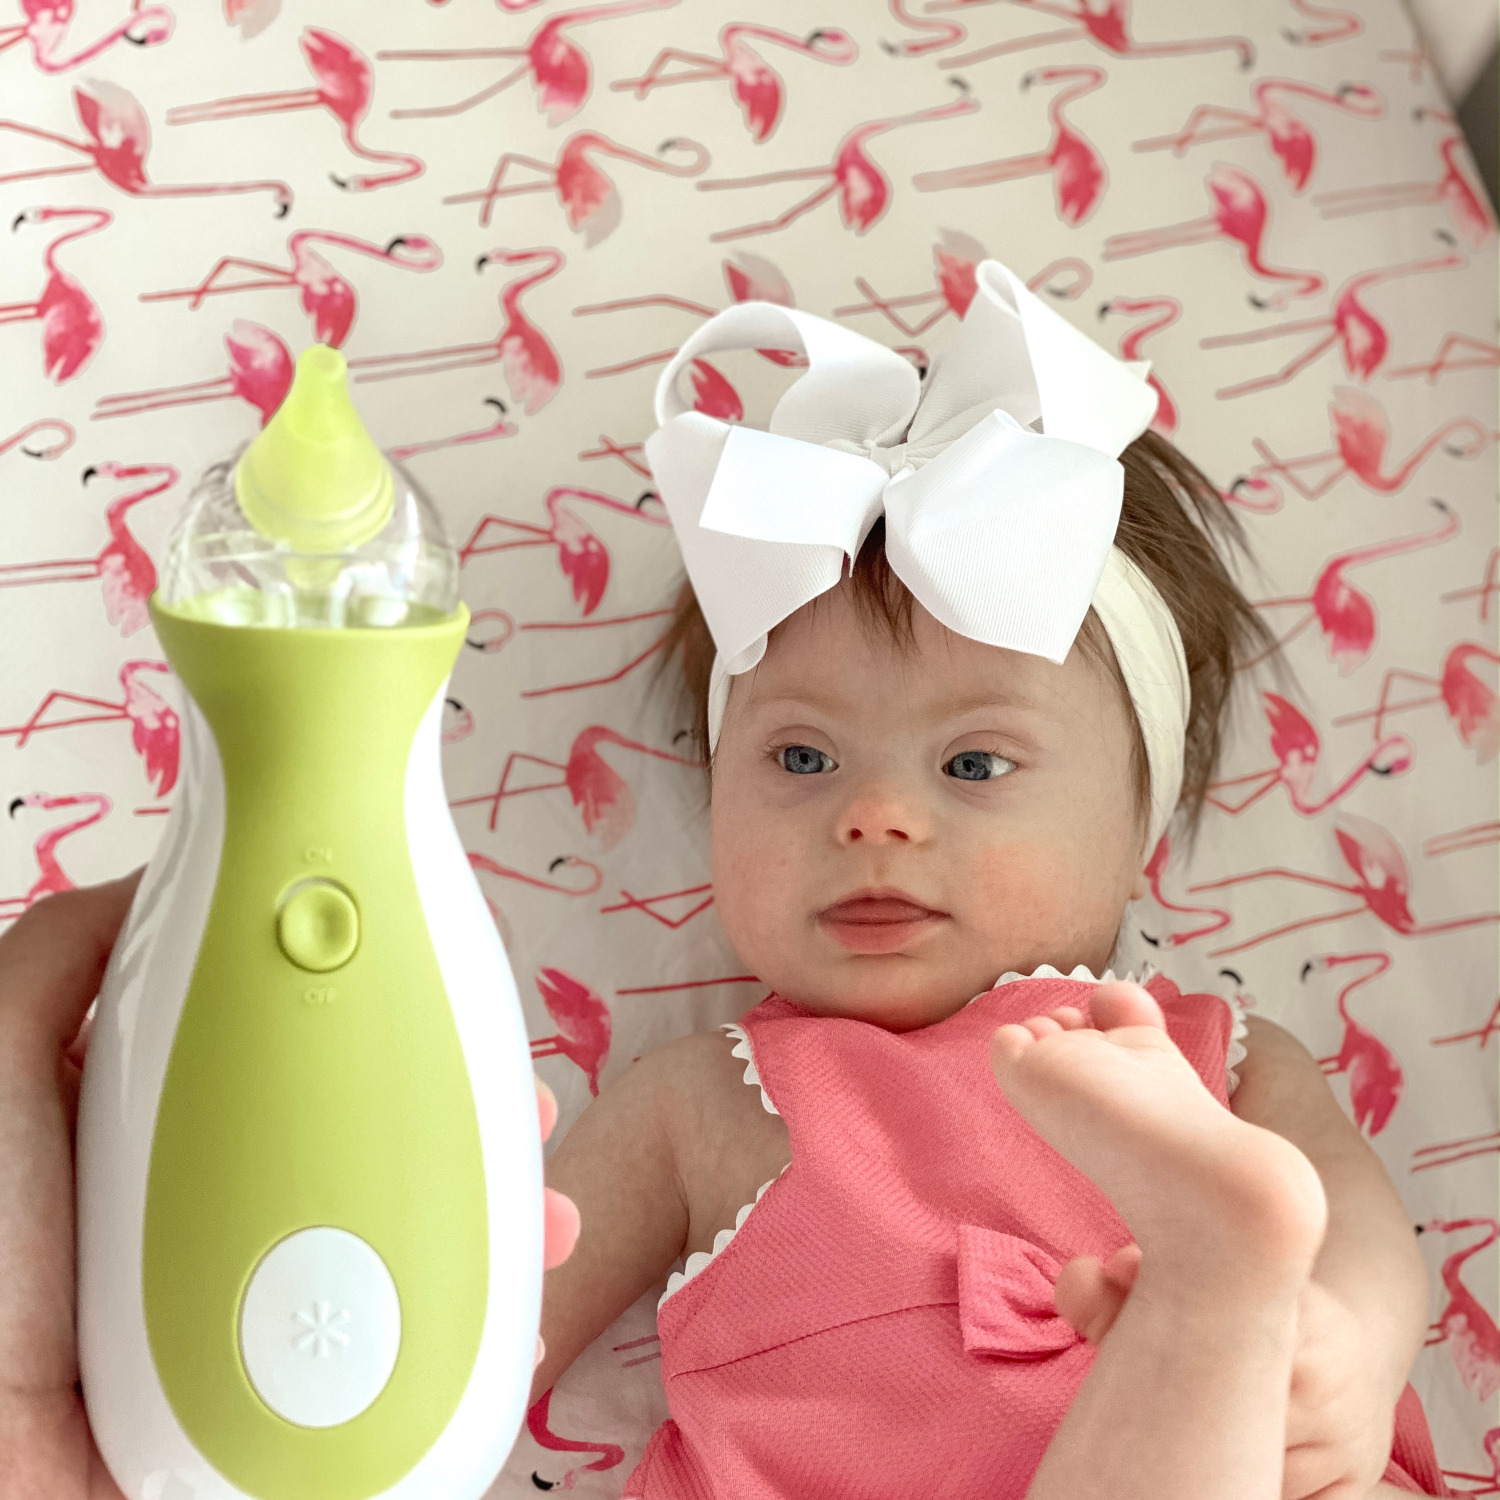 Little girl with Down syndrome looking at a Nosiboo Go portable electric nasal aspirator